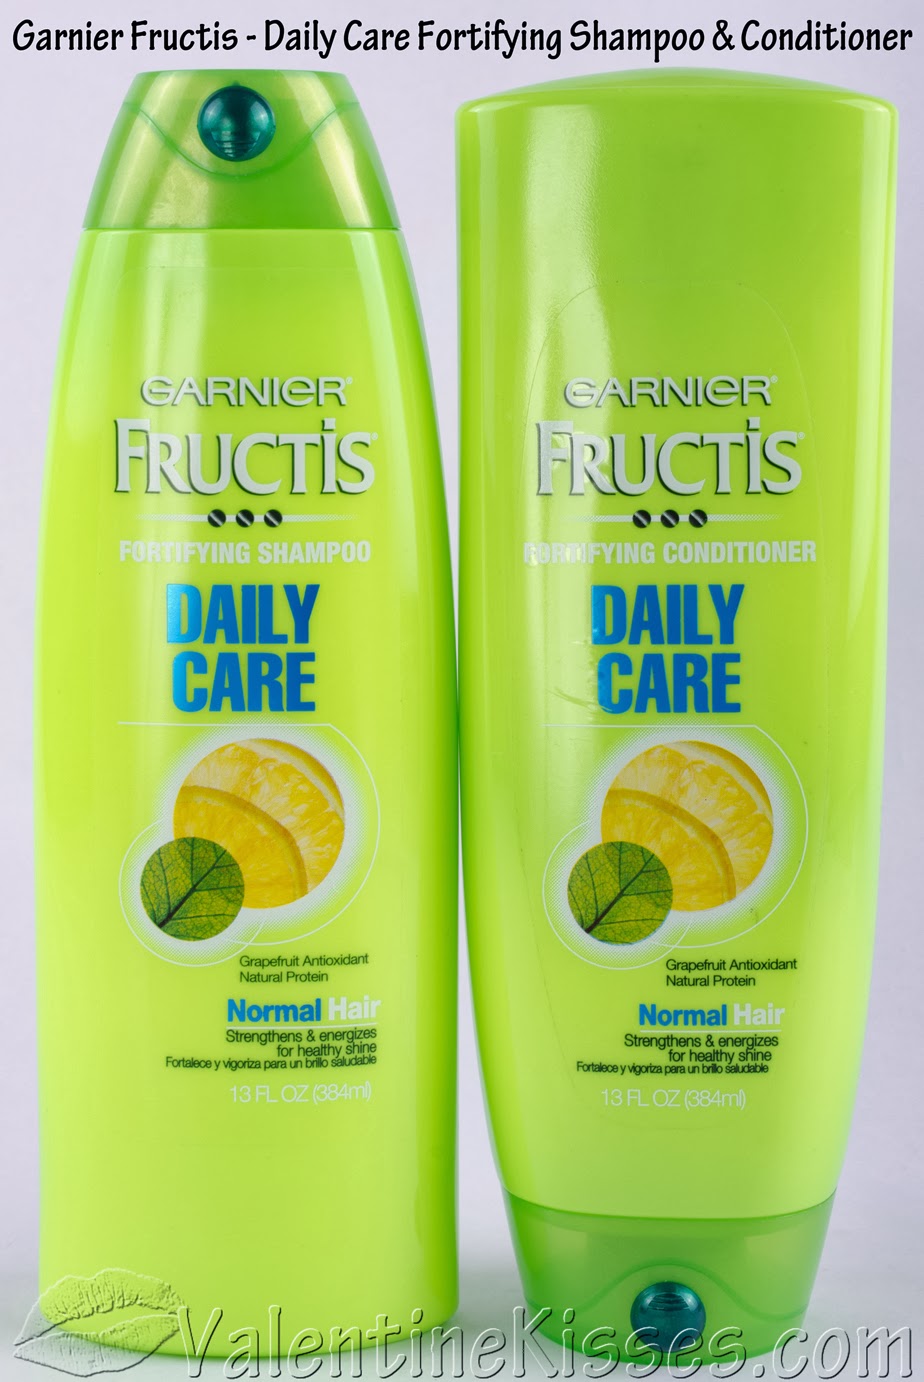 Mew Mew video overal Valentine Kisses: Garnier Fructis Daily Care Shampoo & Conditioner - pics,  swatches, review